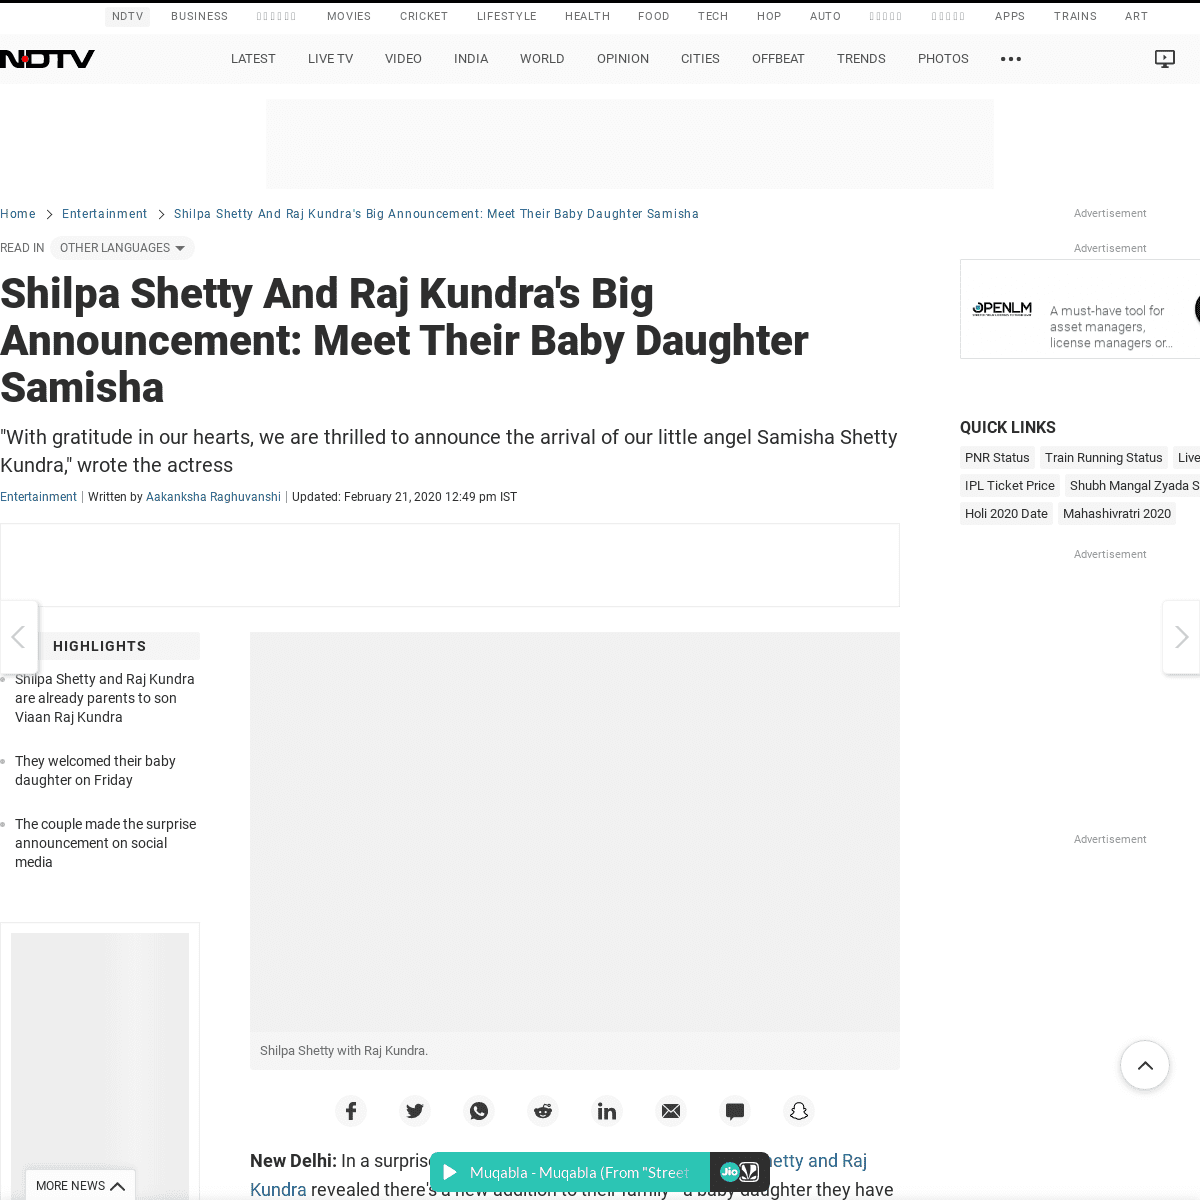 A complete backup of www.ndtv.com/entertainment/shilpa-shetty-and-raj-kundras-big-announcement-meet-their-baby-daughter-samisha-